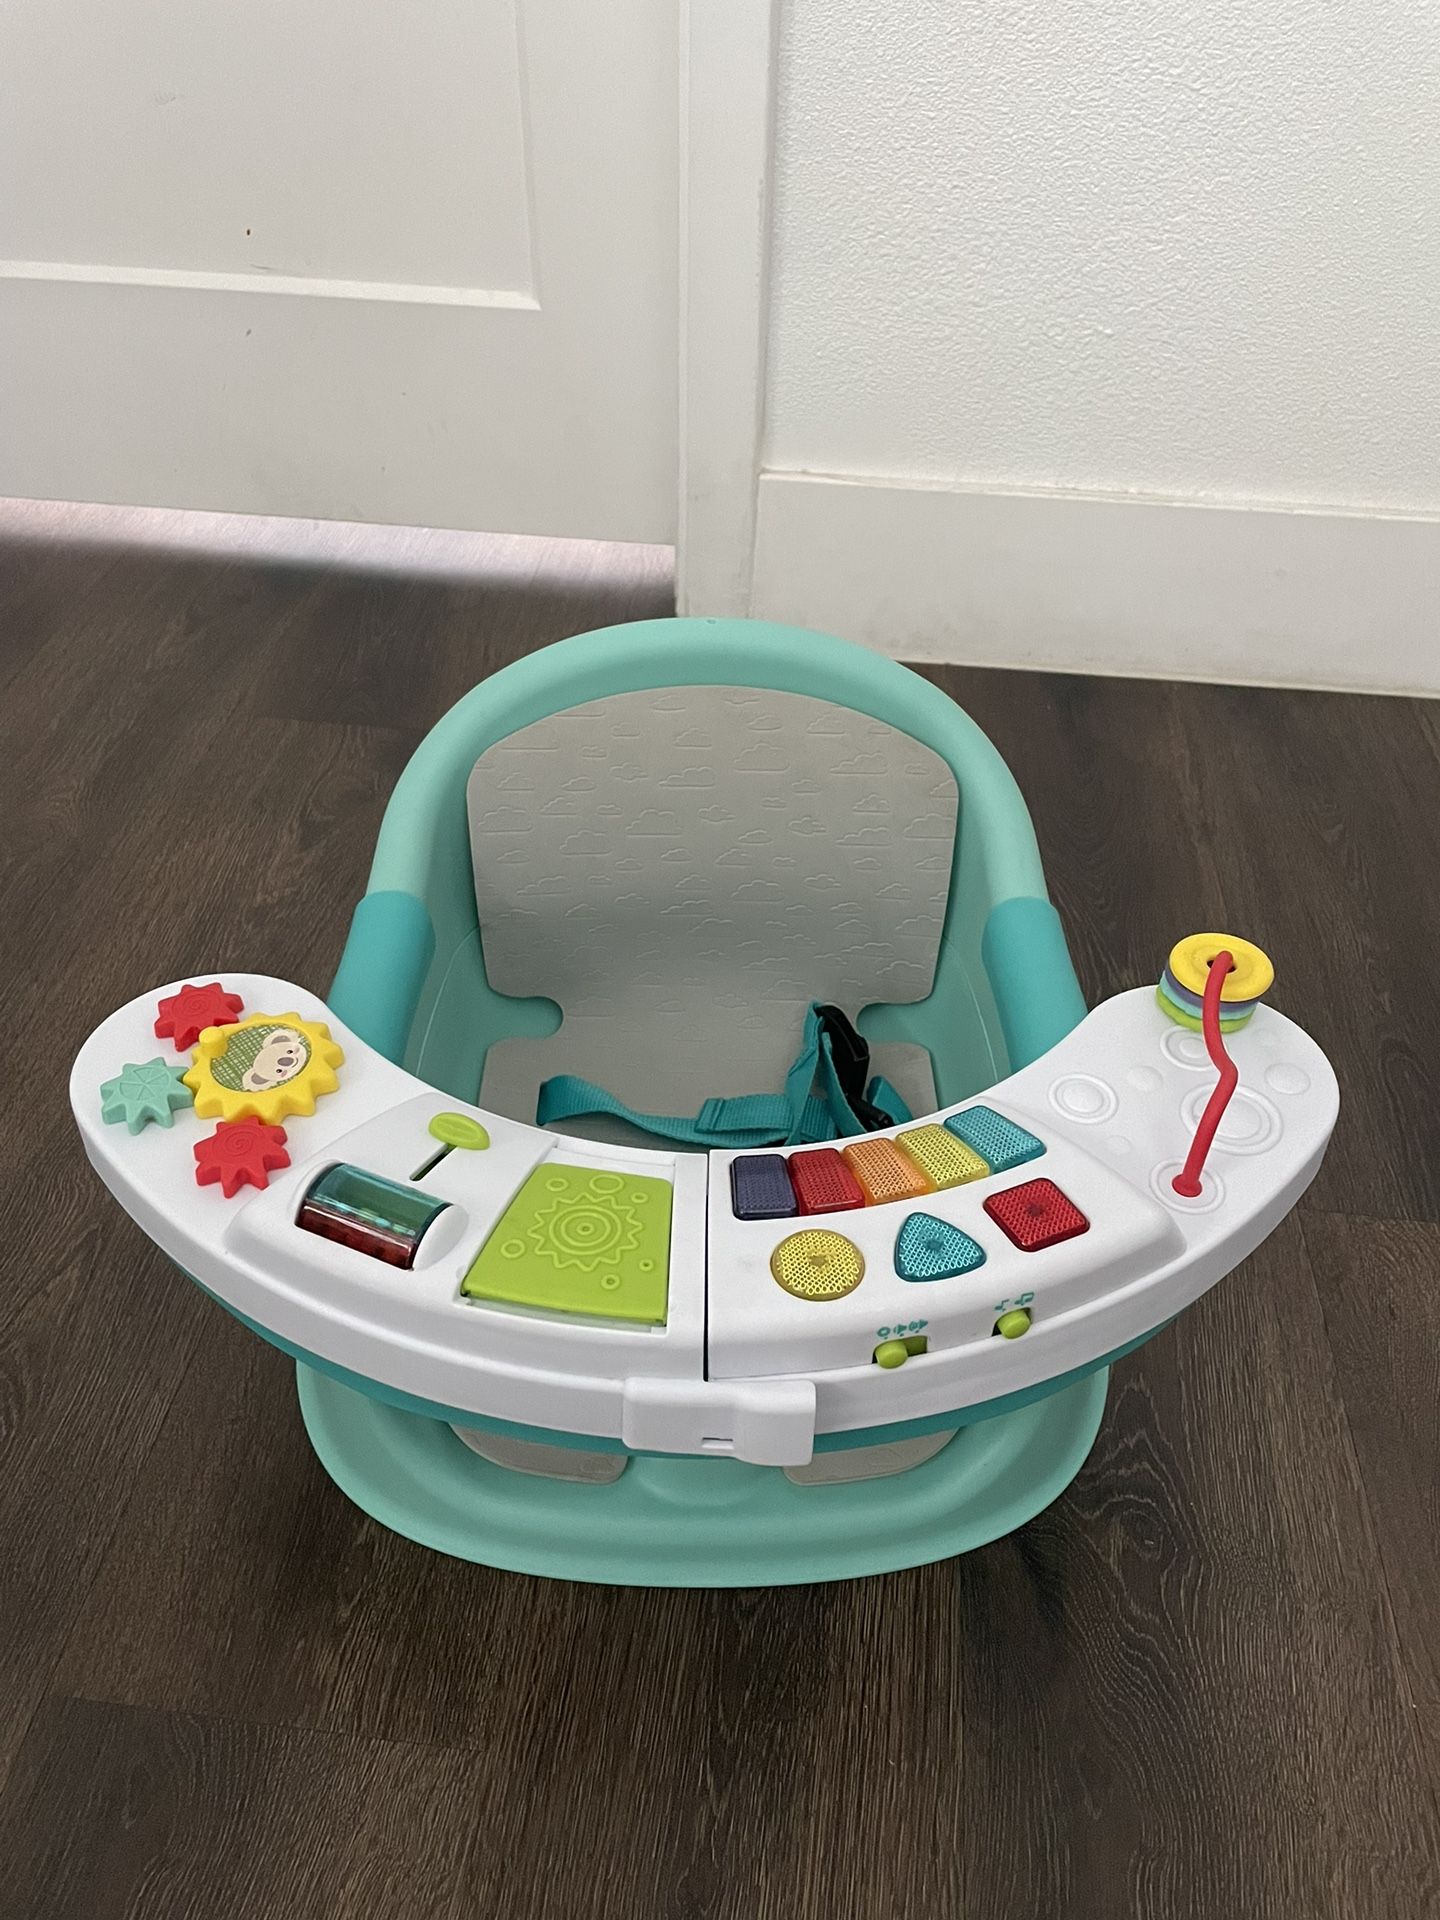 Musical Baby Seat - Infantino Music & Lights 3-in-1 Discovery Seat & Booster